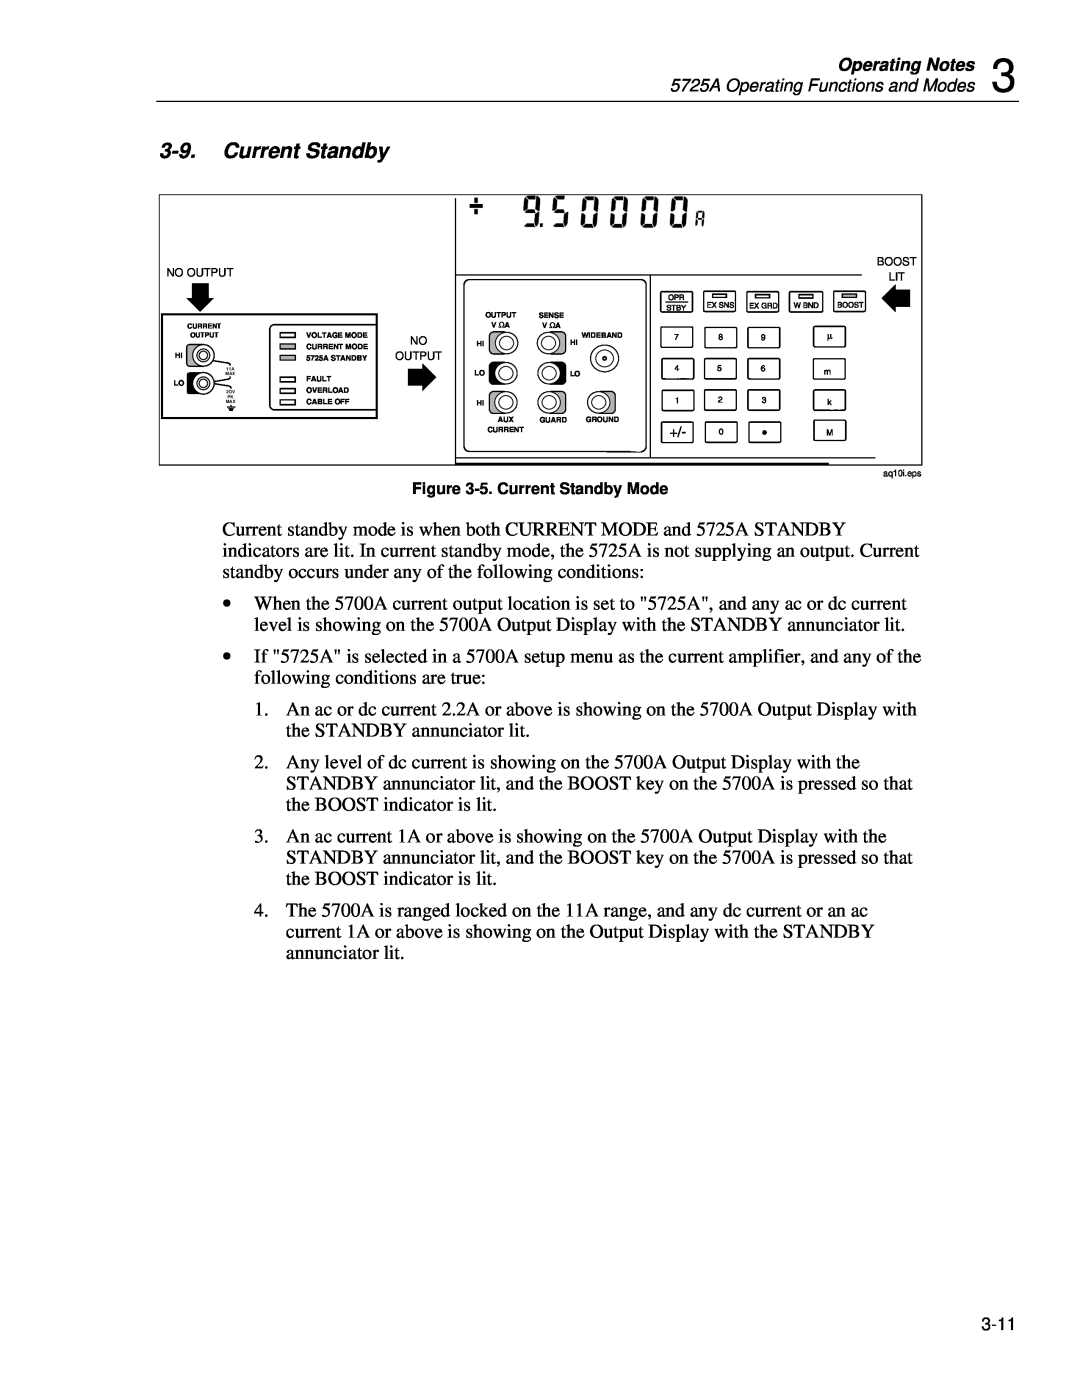 Fluke instruction manual Current Standby, Operating Notes, 5725A Operating Functions and Modes 